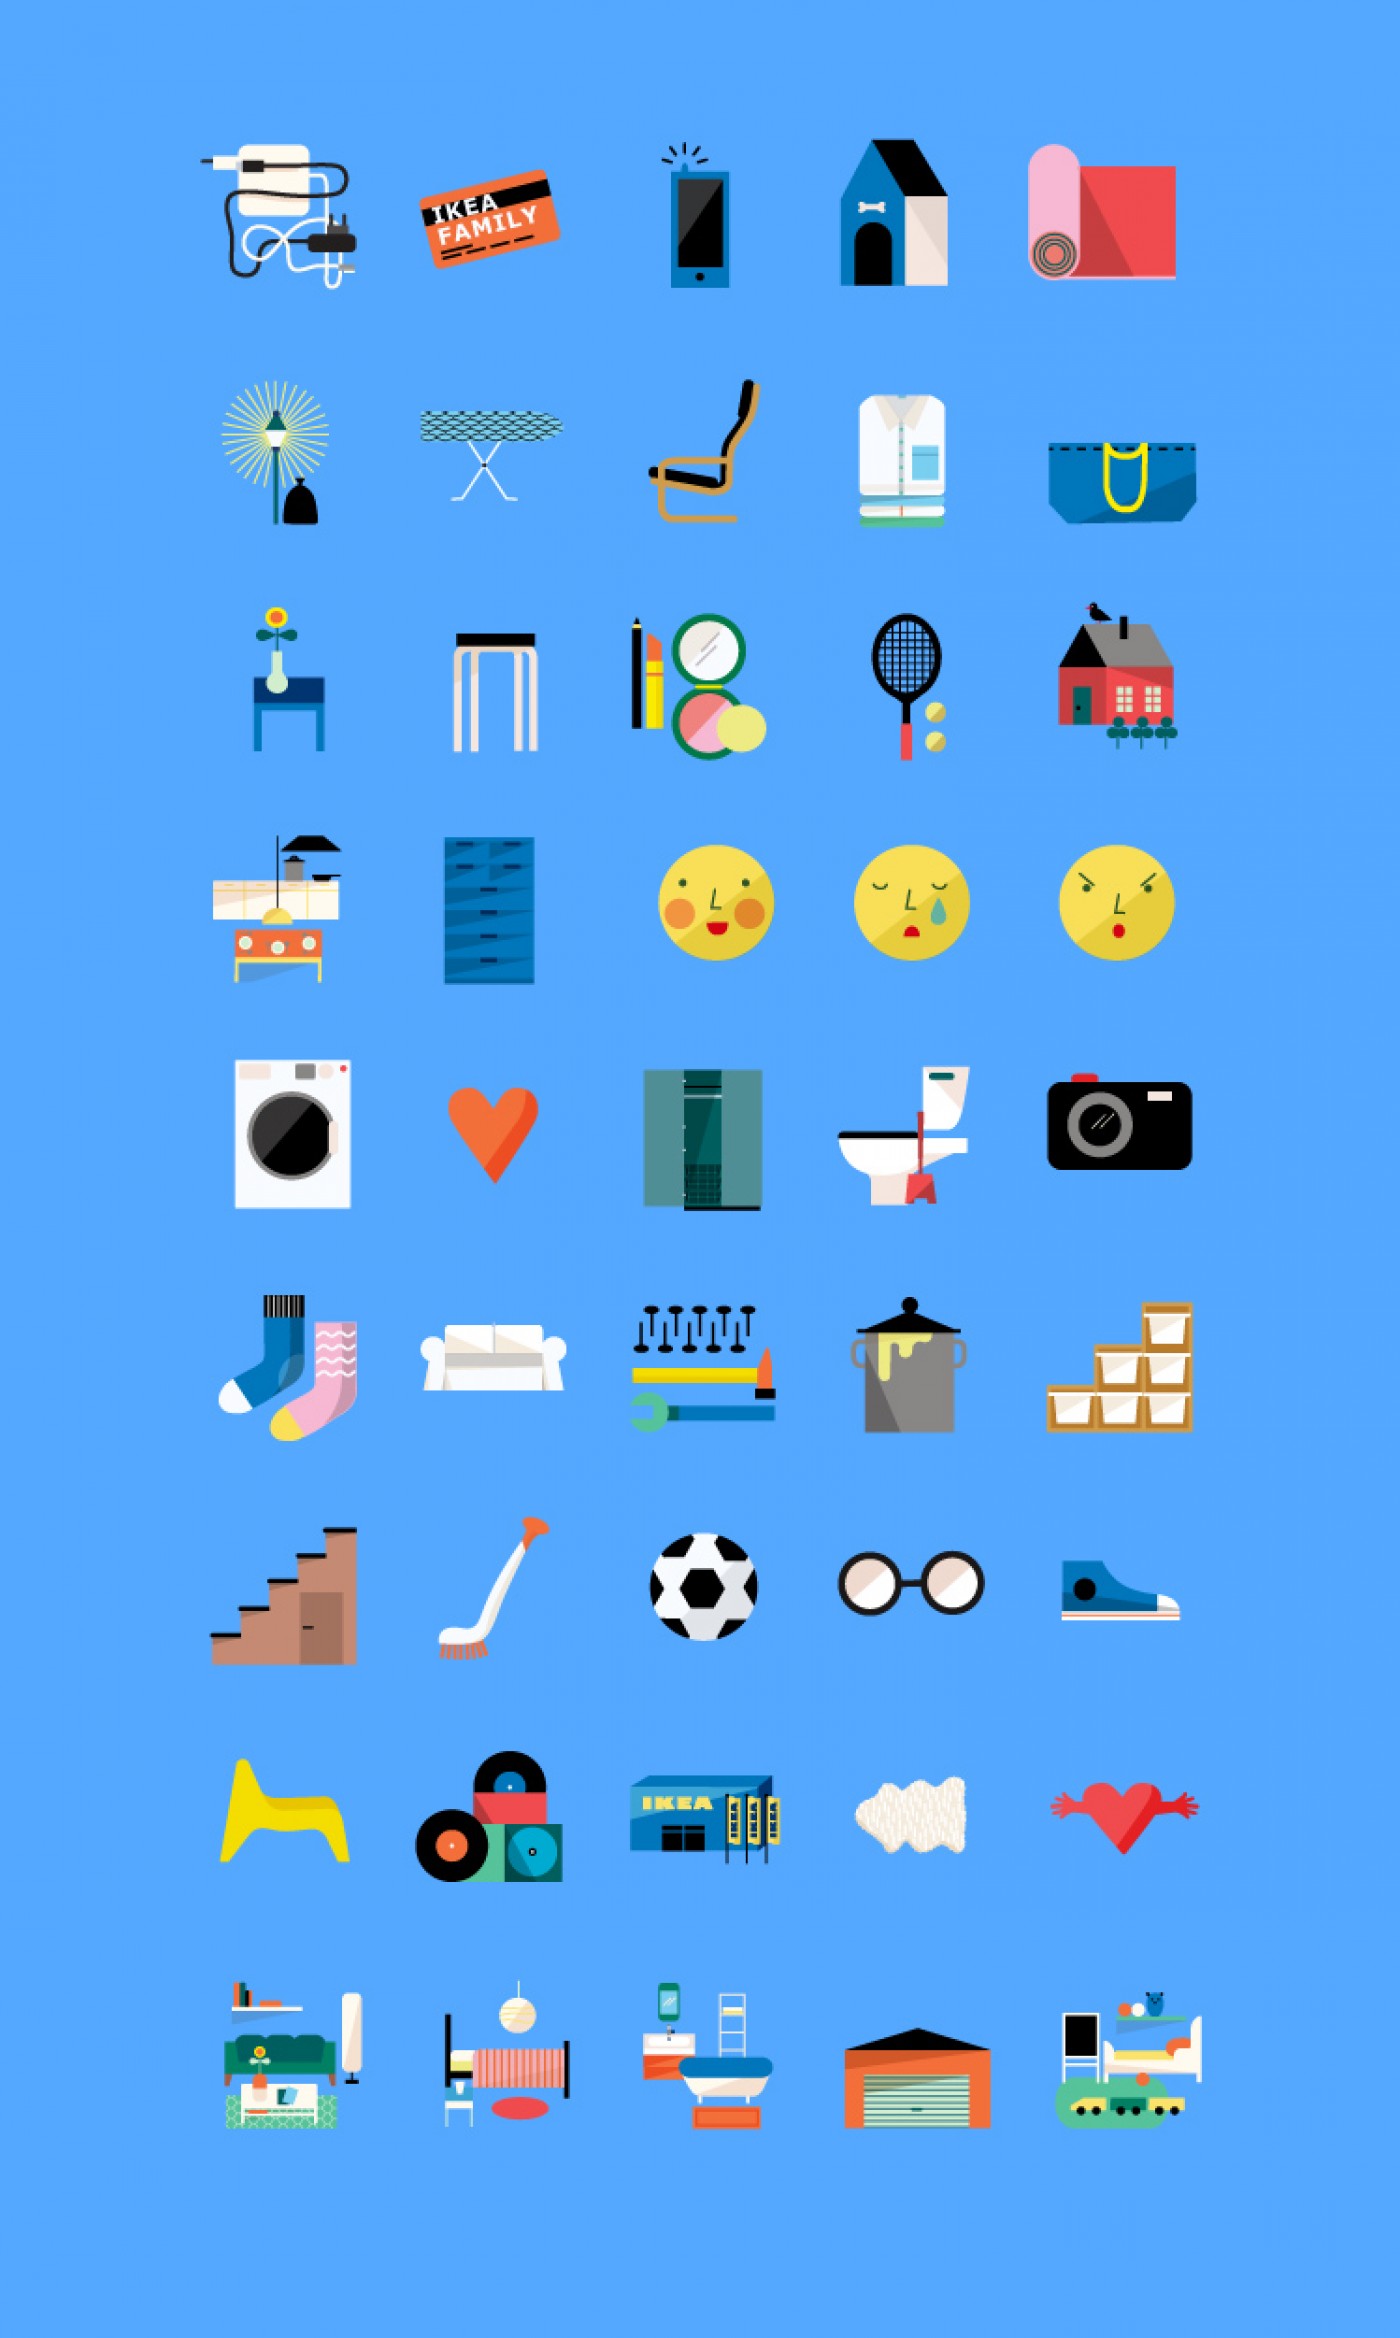 ALL ICONS